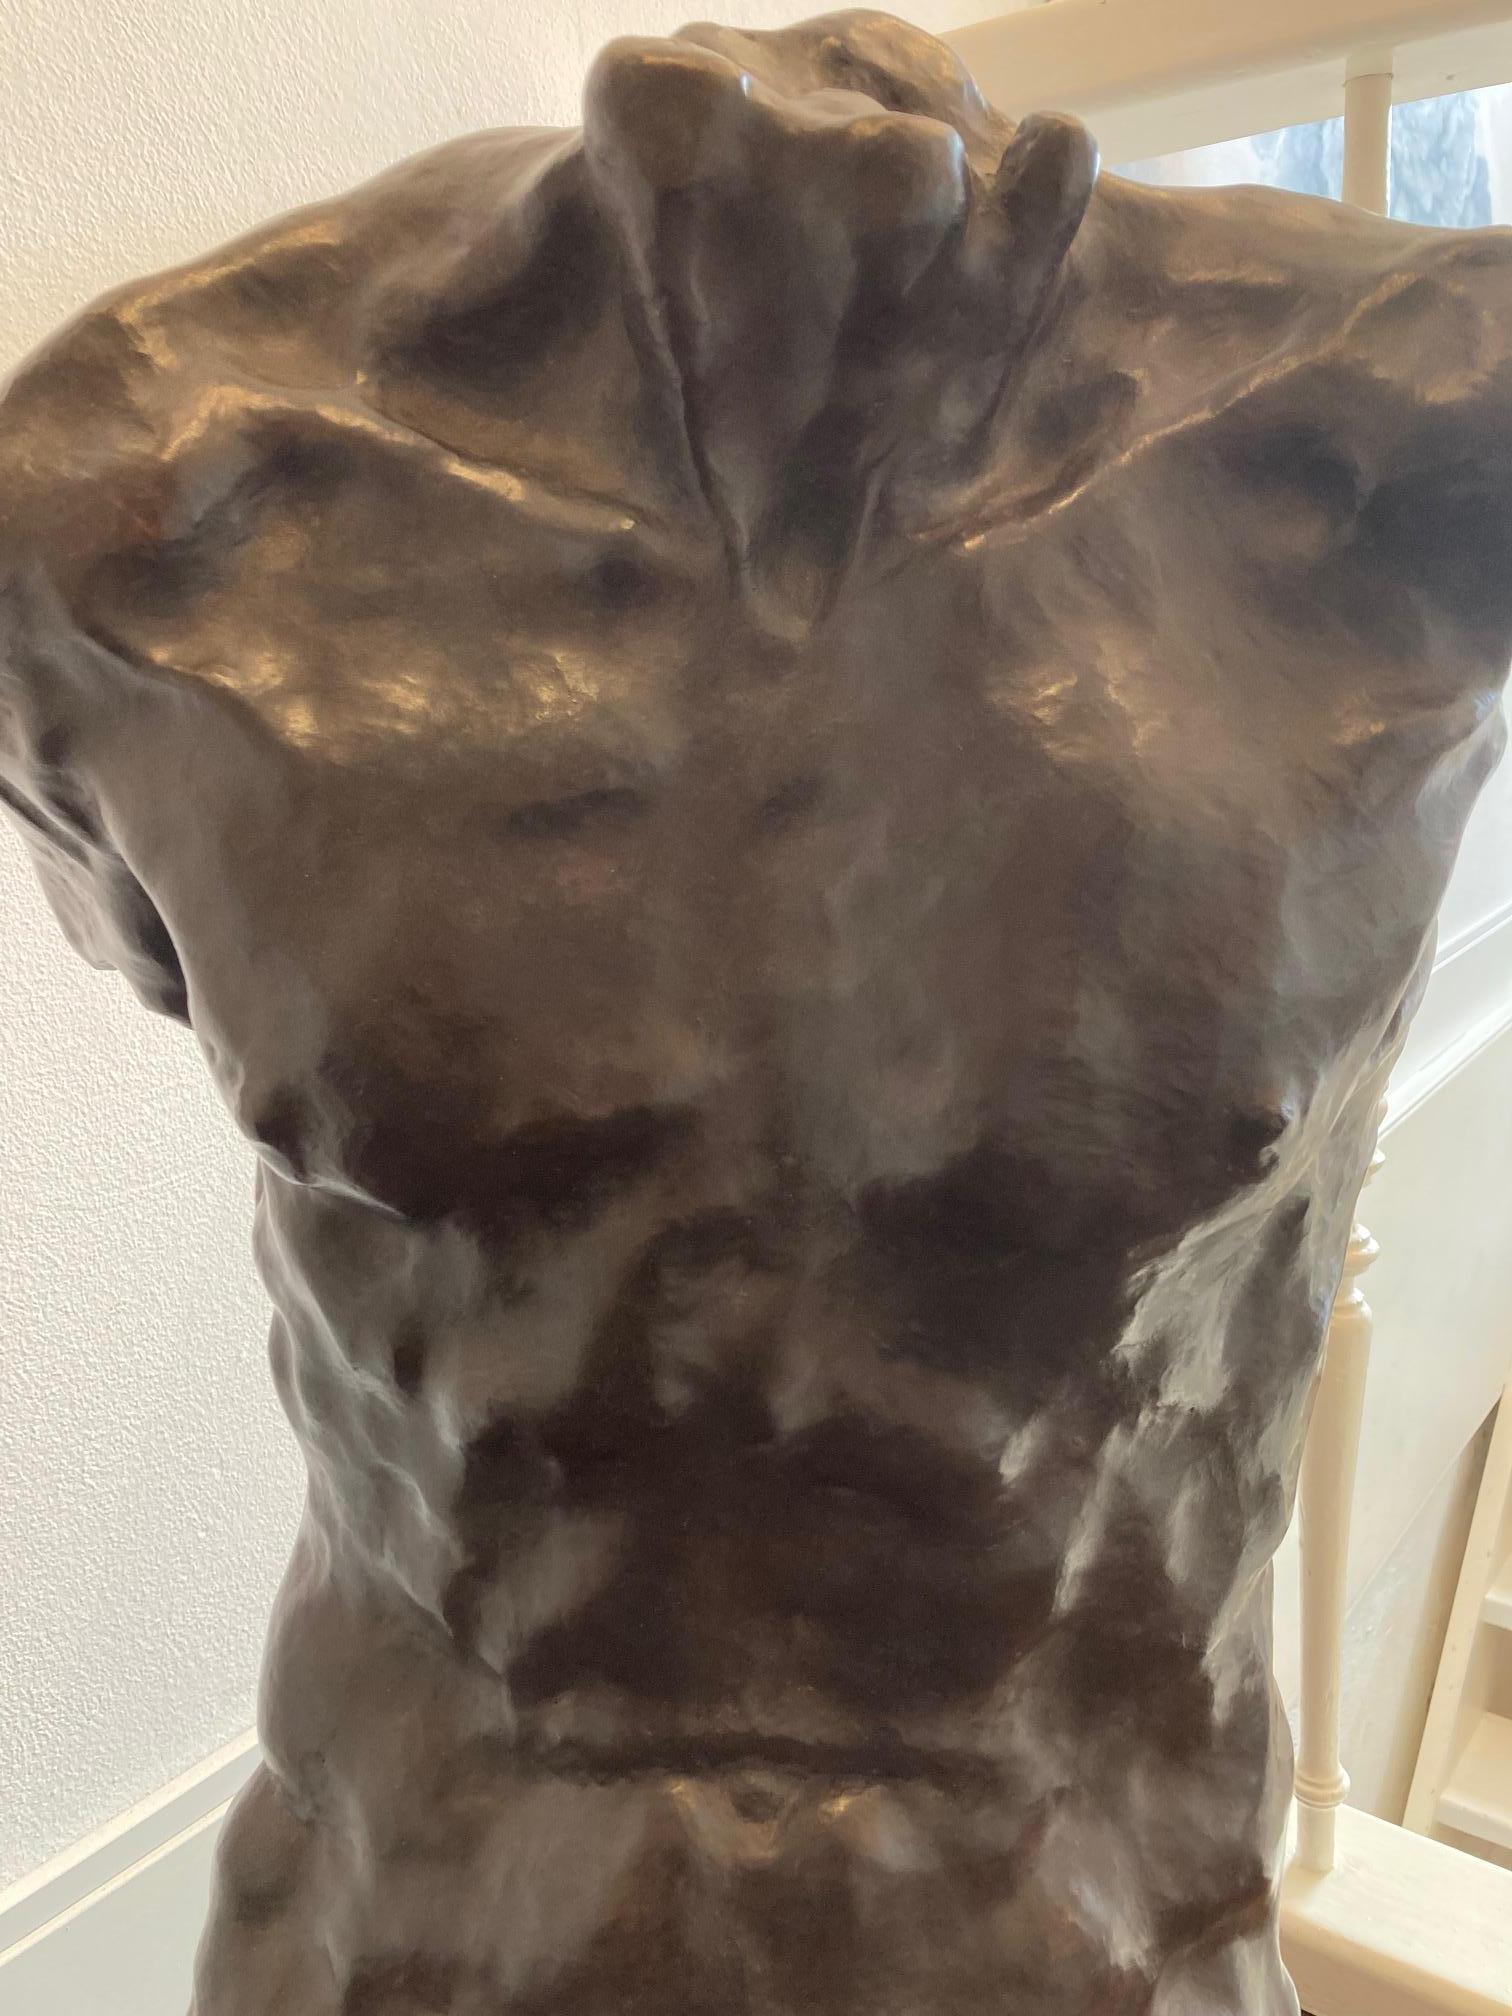 Body and Soul Bronze Sculpture Torso Torse Male Nude In Stock 
For years Joris August Verdonkschot decicated himself to filming. He studied Law and Cultural Science and wrote a lot of filmscripts. Later in life he developed the skills to sculpt.